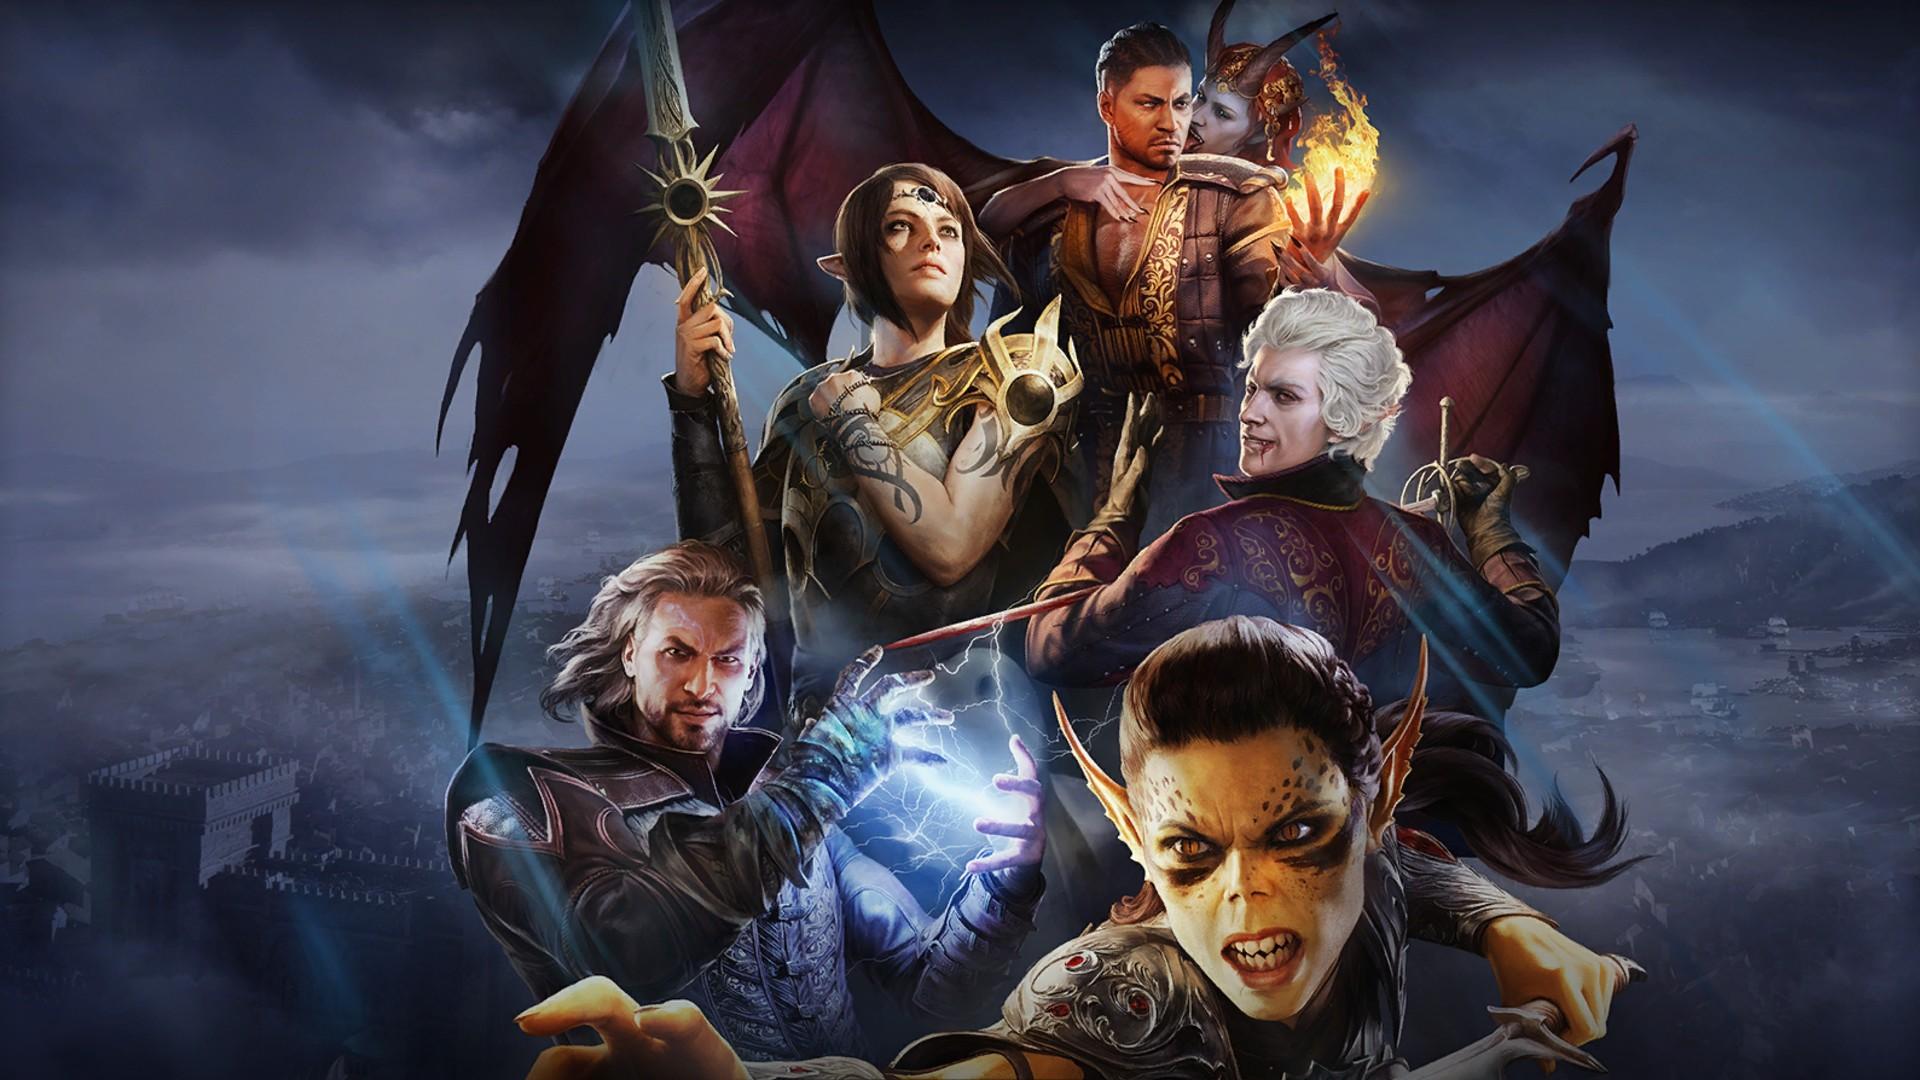 Baldur's Gate 3 is surpassing Dota 2 in popularity as its peak online  player count has exceeded 800,000. Gaming news - eSports events review,  analytics, announcements, interviews, statistics - vMohnEmak